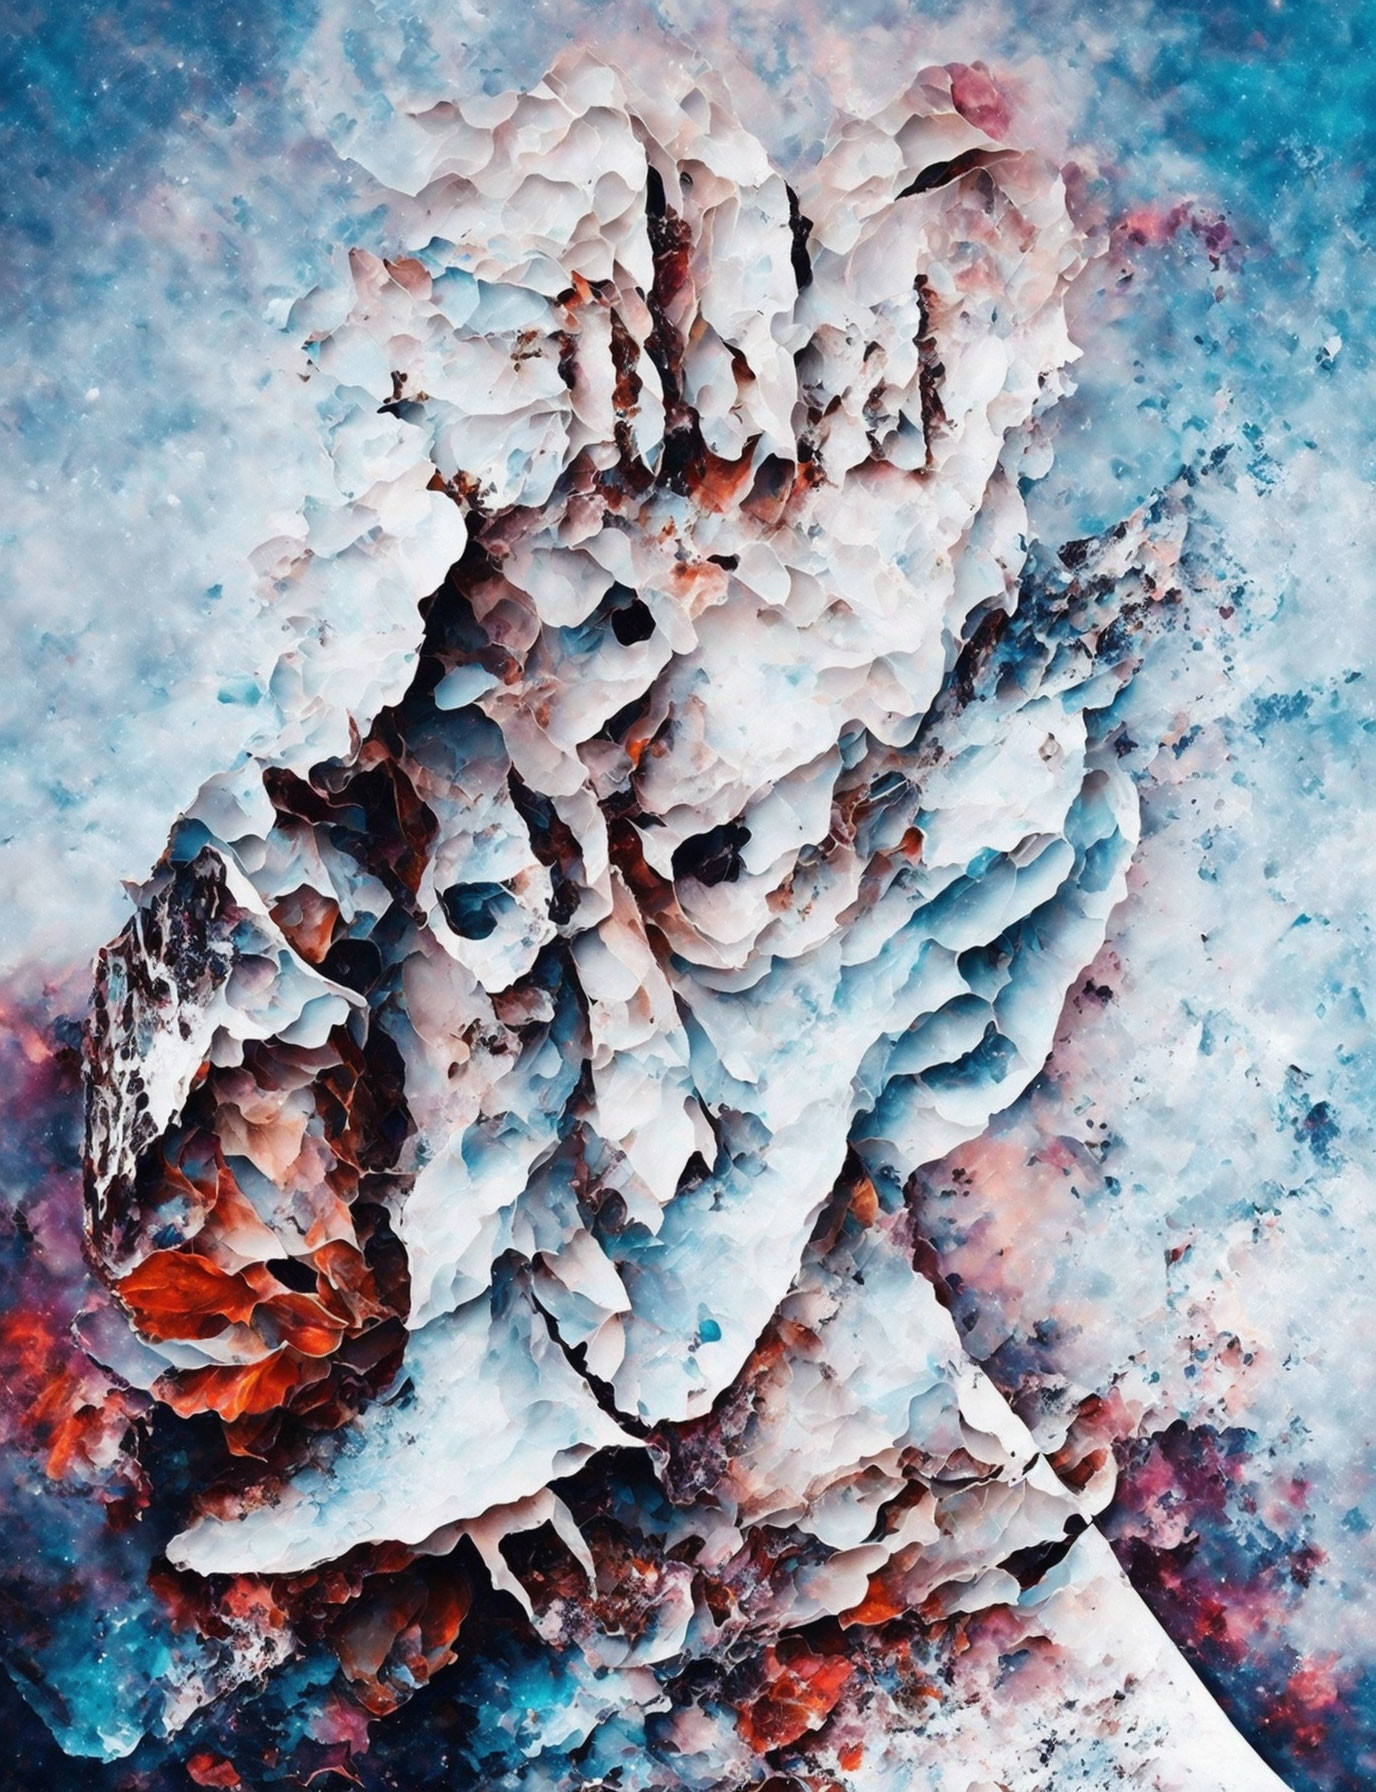 Abstract Top-Down Image of Icy Terrain with Blue and Rusty Brown Hues